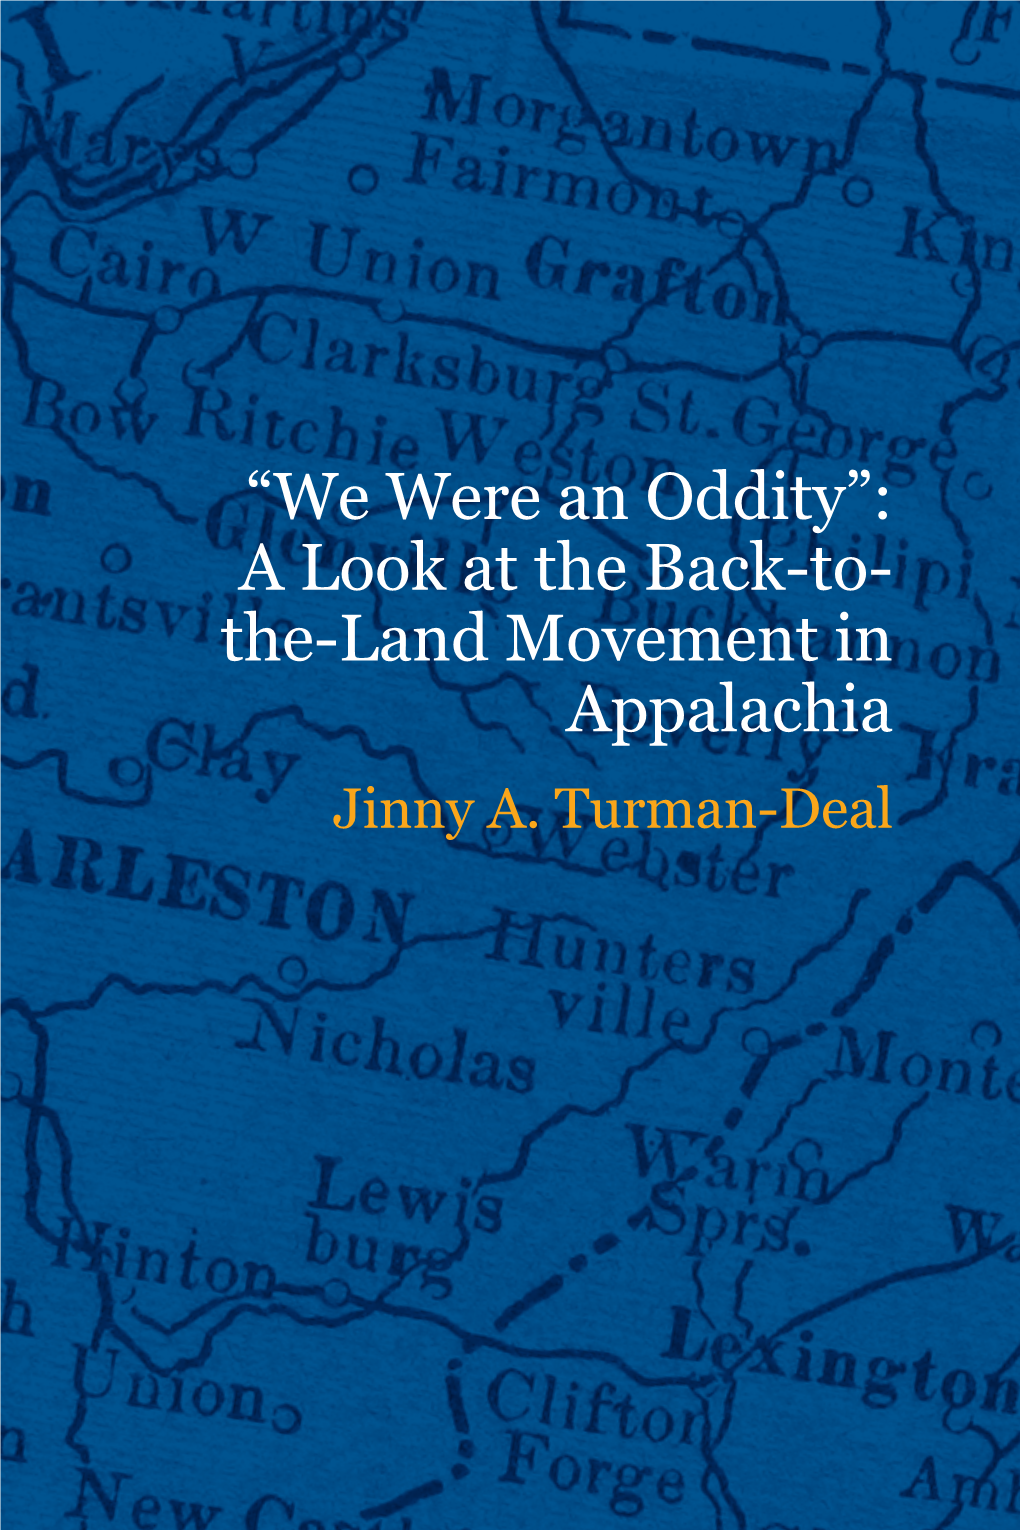 “We Were an Oddity”: a Look at the Back-To-The-Land Movement In